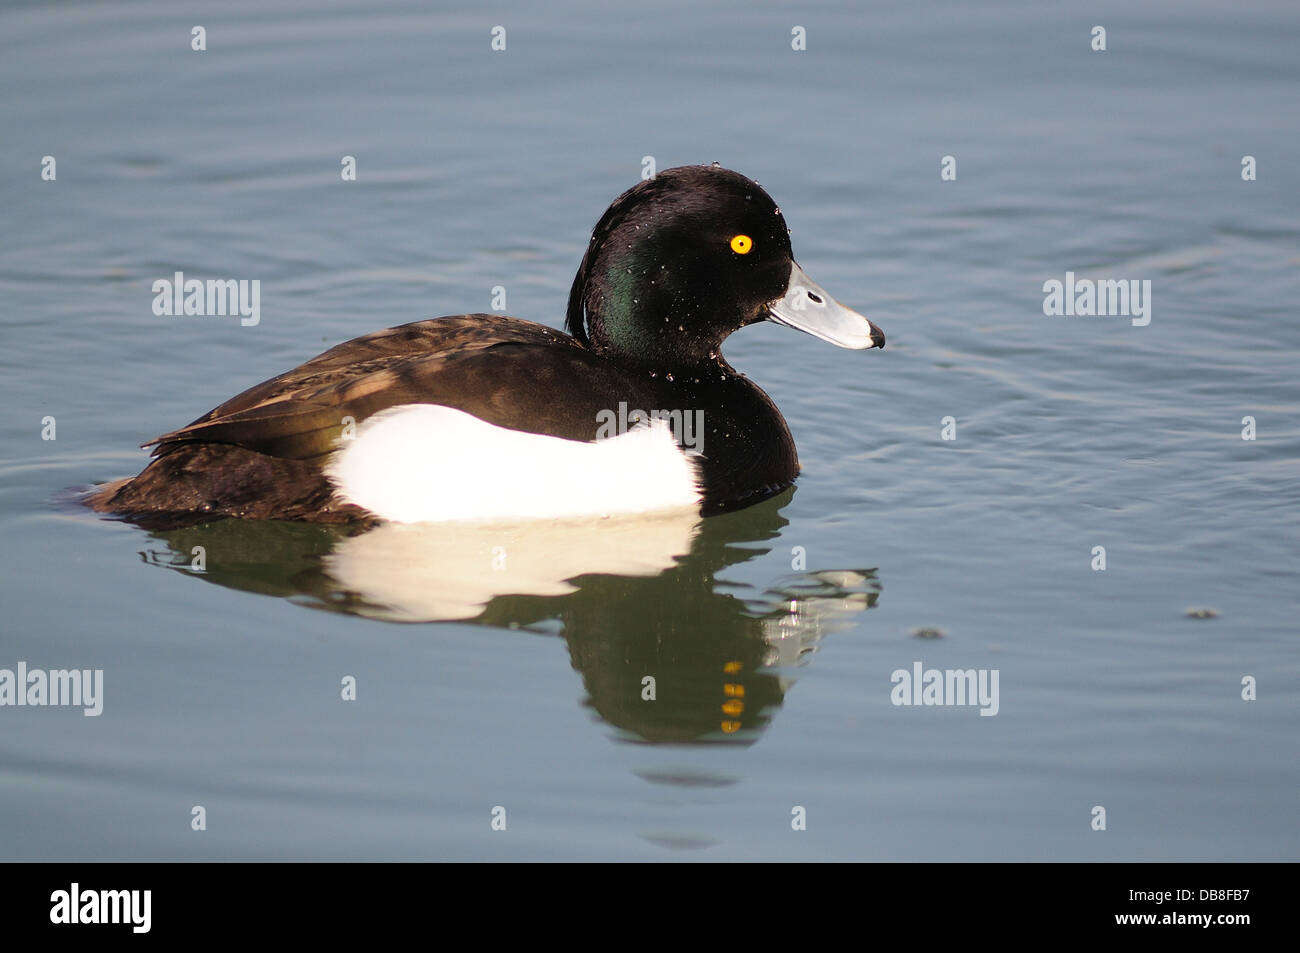 A male tufted duck swimming in calm water Stock Photo